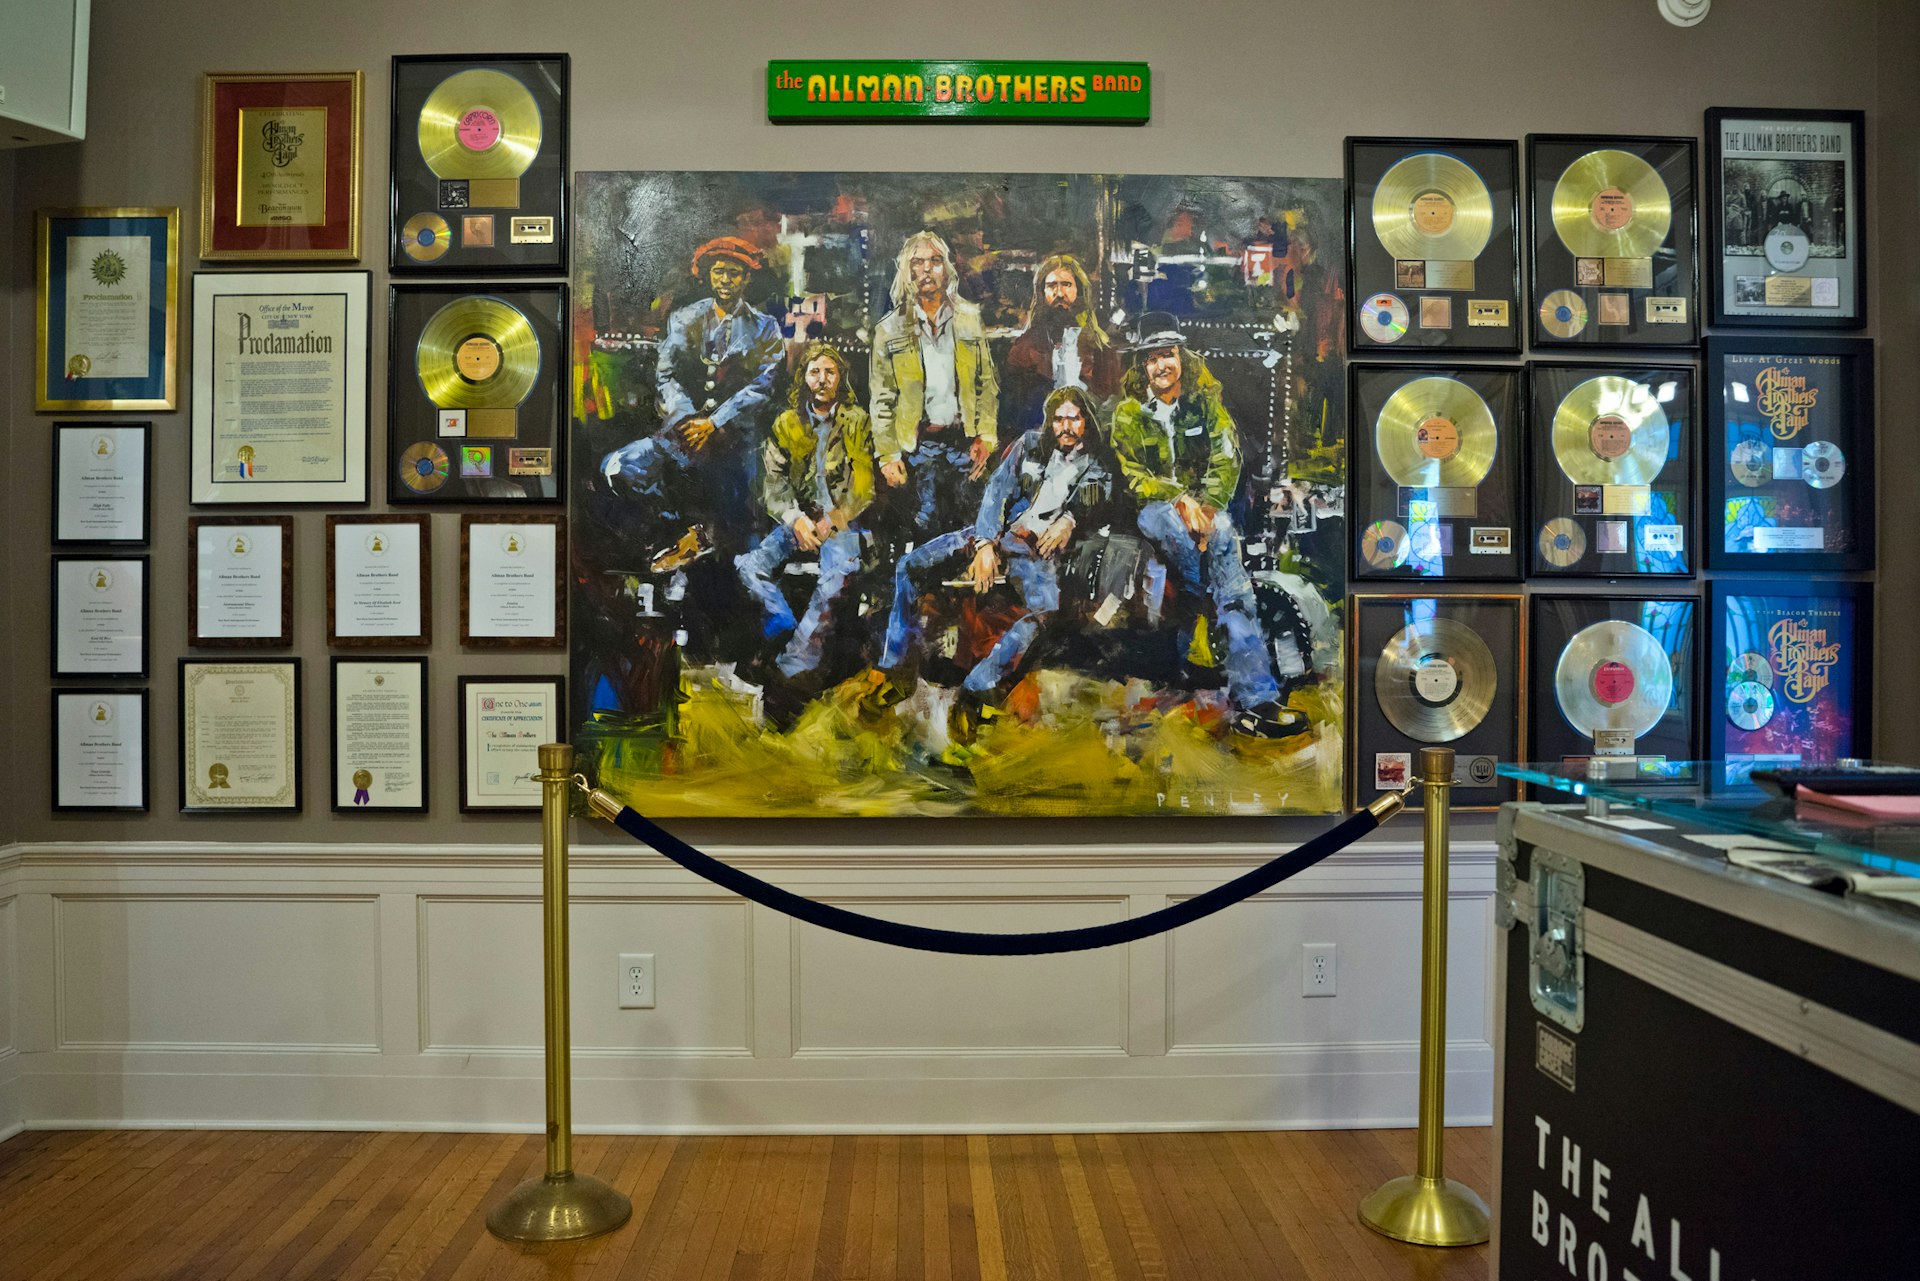 A large image of the Allman Brothers and gold records line the interior of the museum; USA museums for music lovers